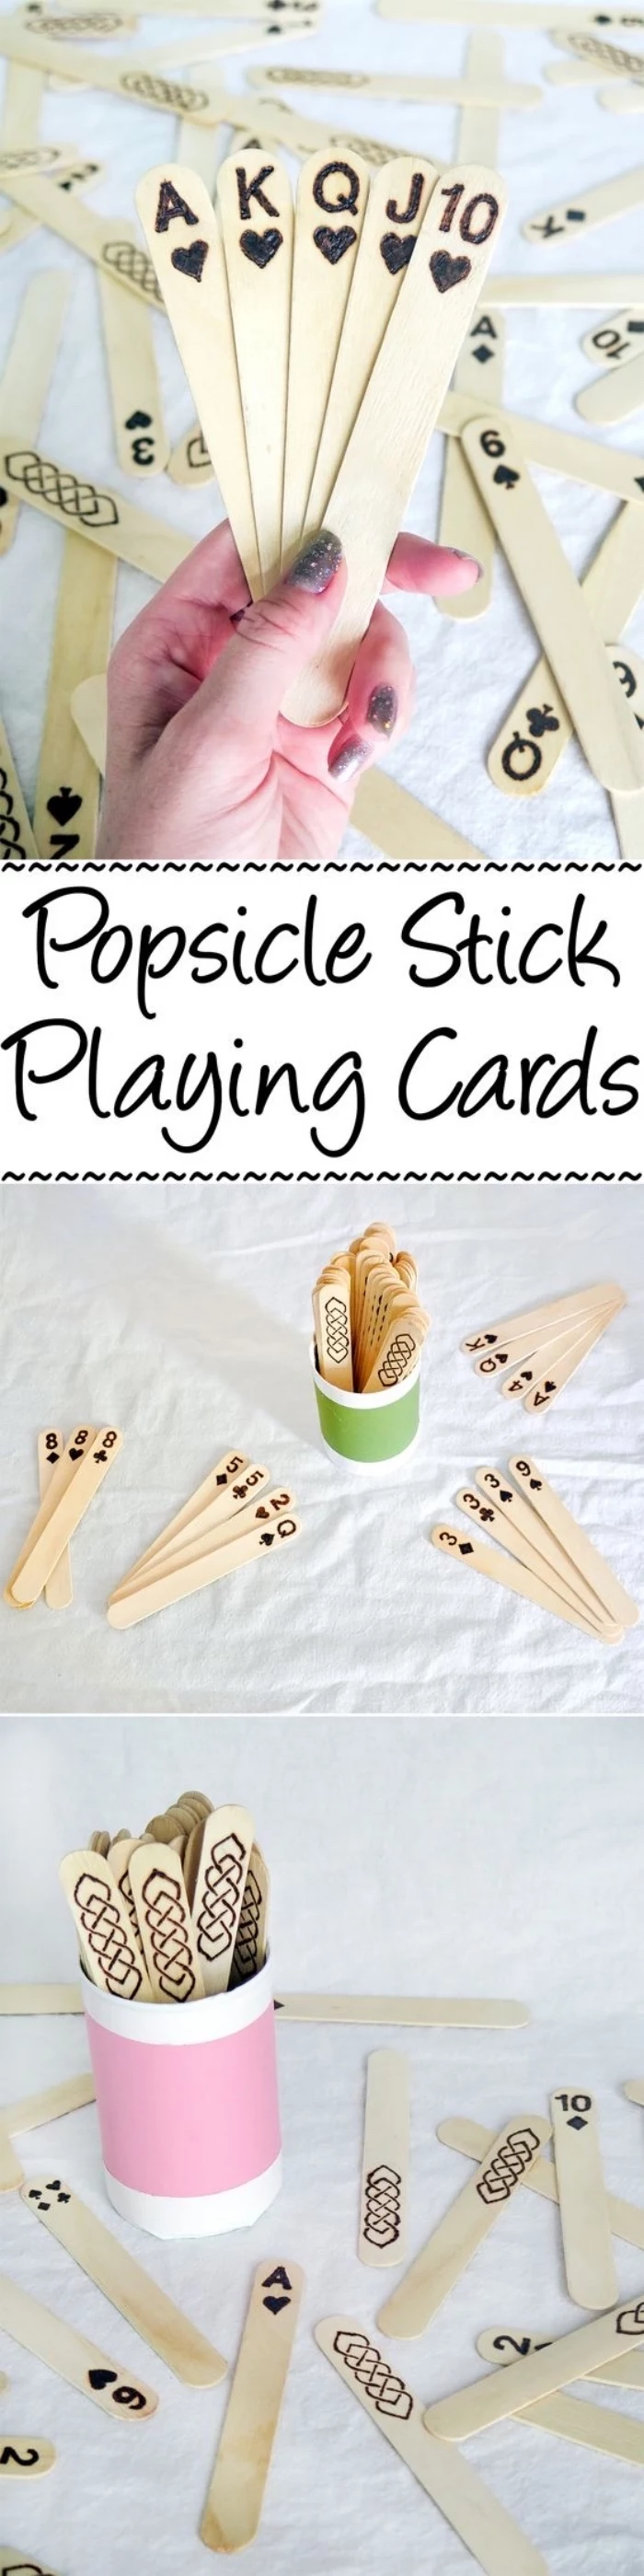 popsicle stick playing cards, step by step tutorial, diy projects for teens, green and pink, paper cups